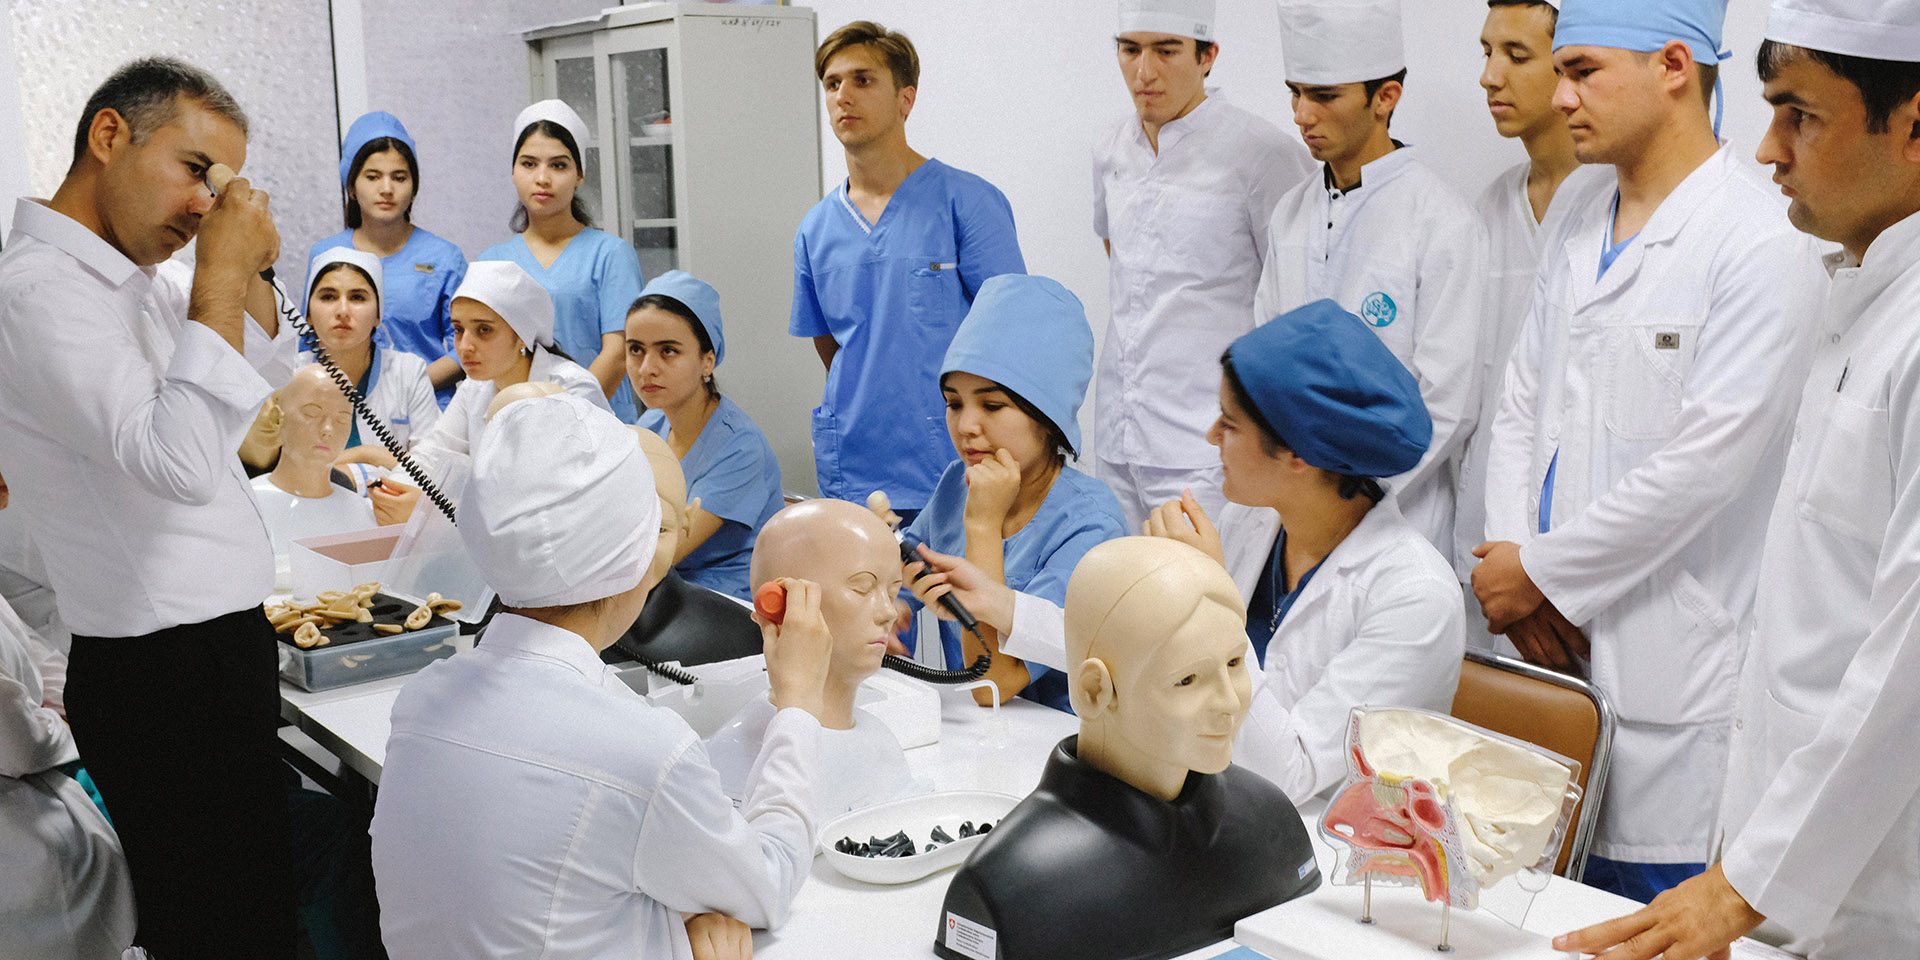 Tajik medical personnel are being trained. On the table are mannequins and medical instruments.